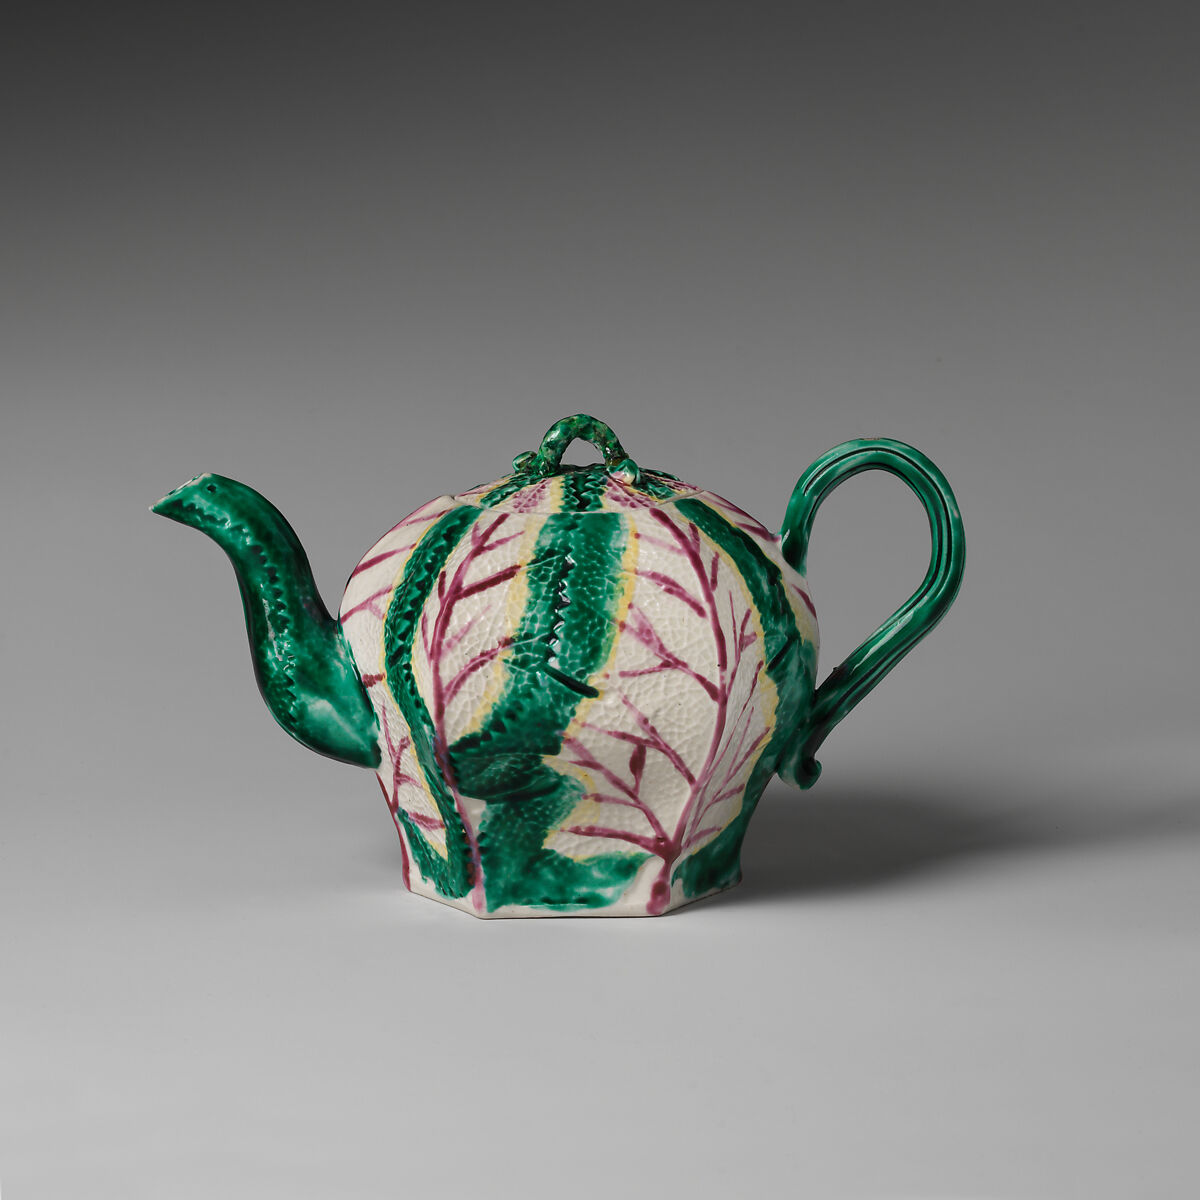 Teapot in the form of a cabbage, Salt-glazed stoneware with enamel decoration, British, Staffordshire 